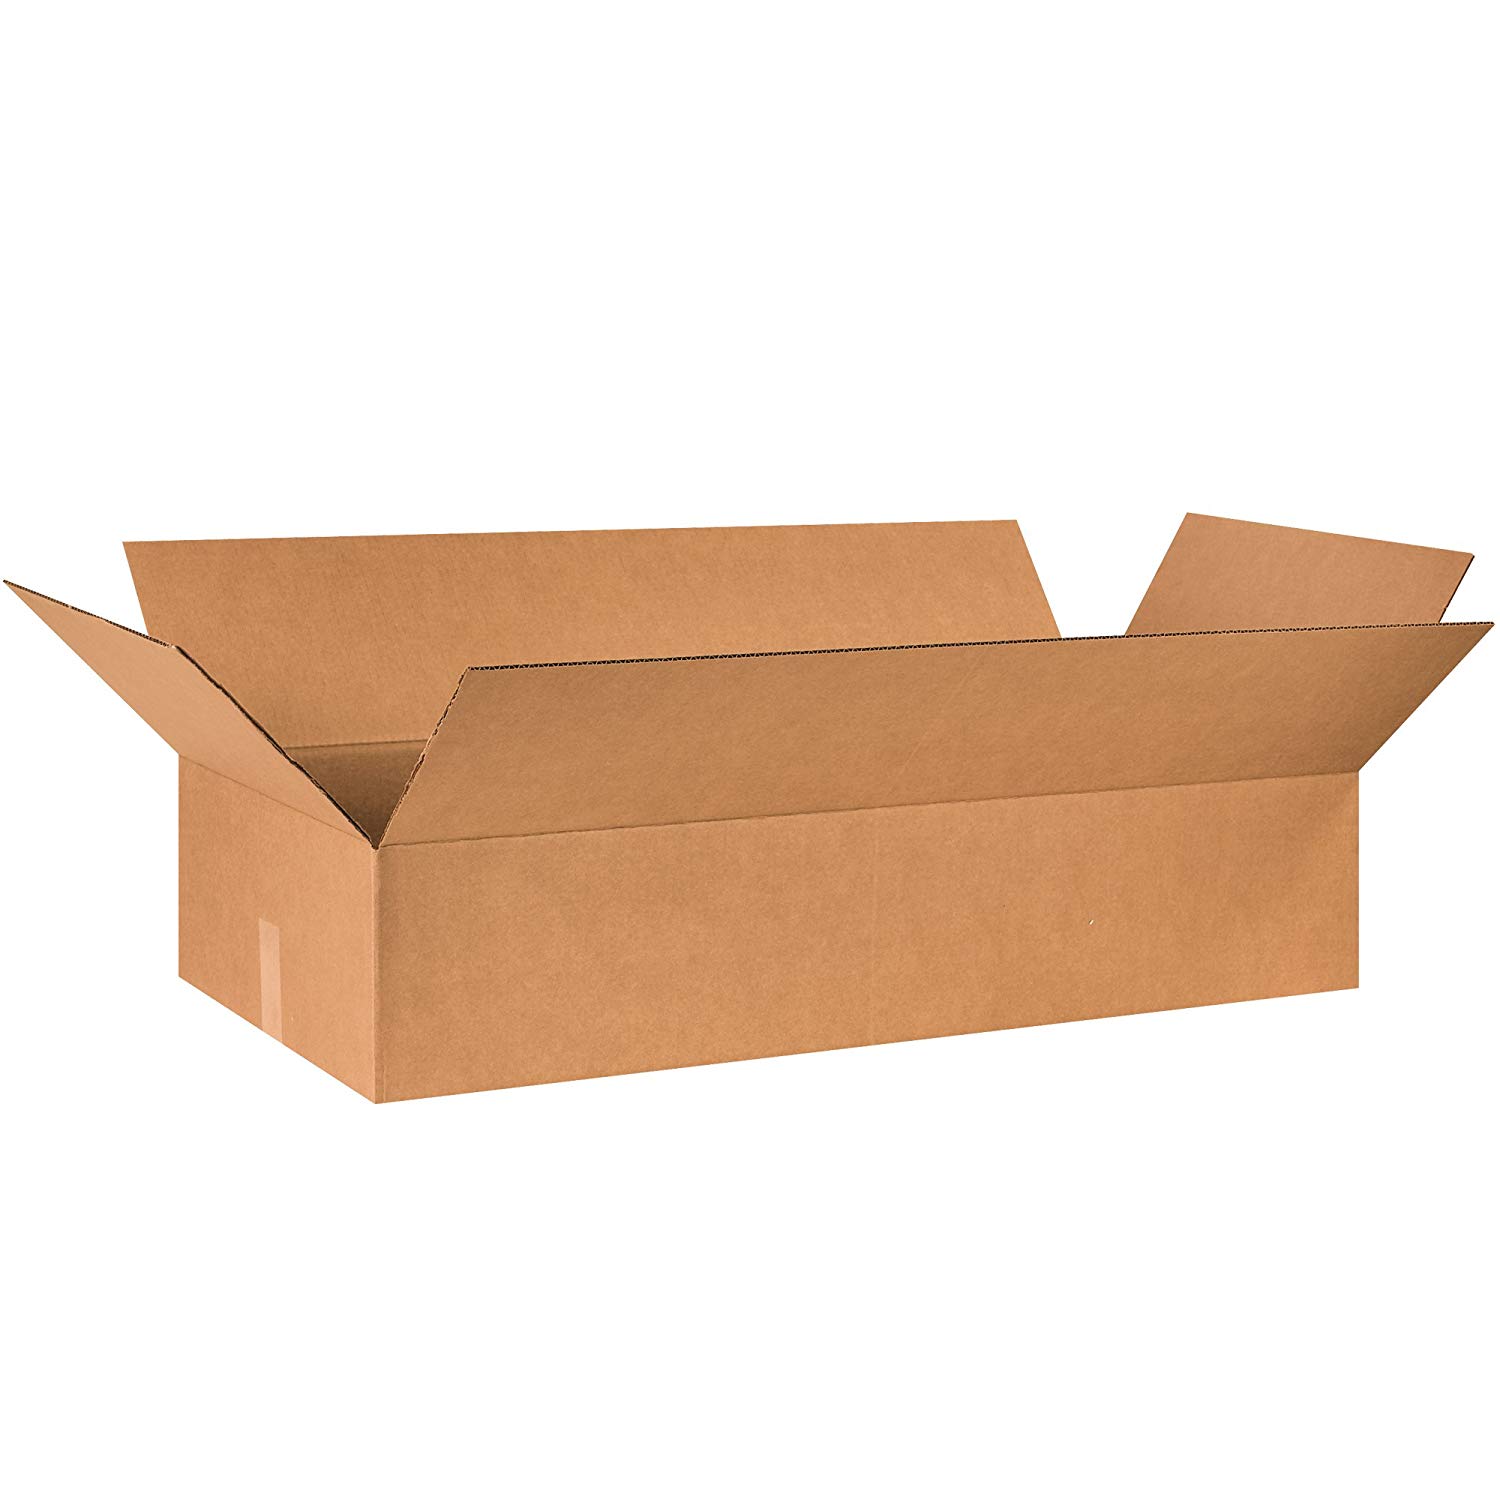 New for Packing or Shipping Needs 5 Corrugated Boxes 16 x 12 x 12  32 ECT